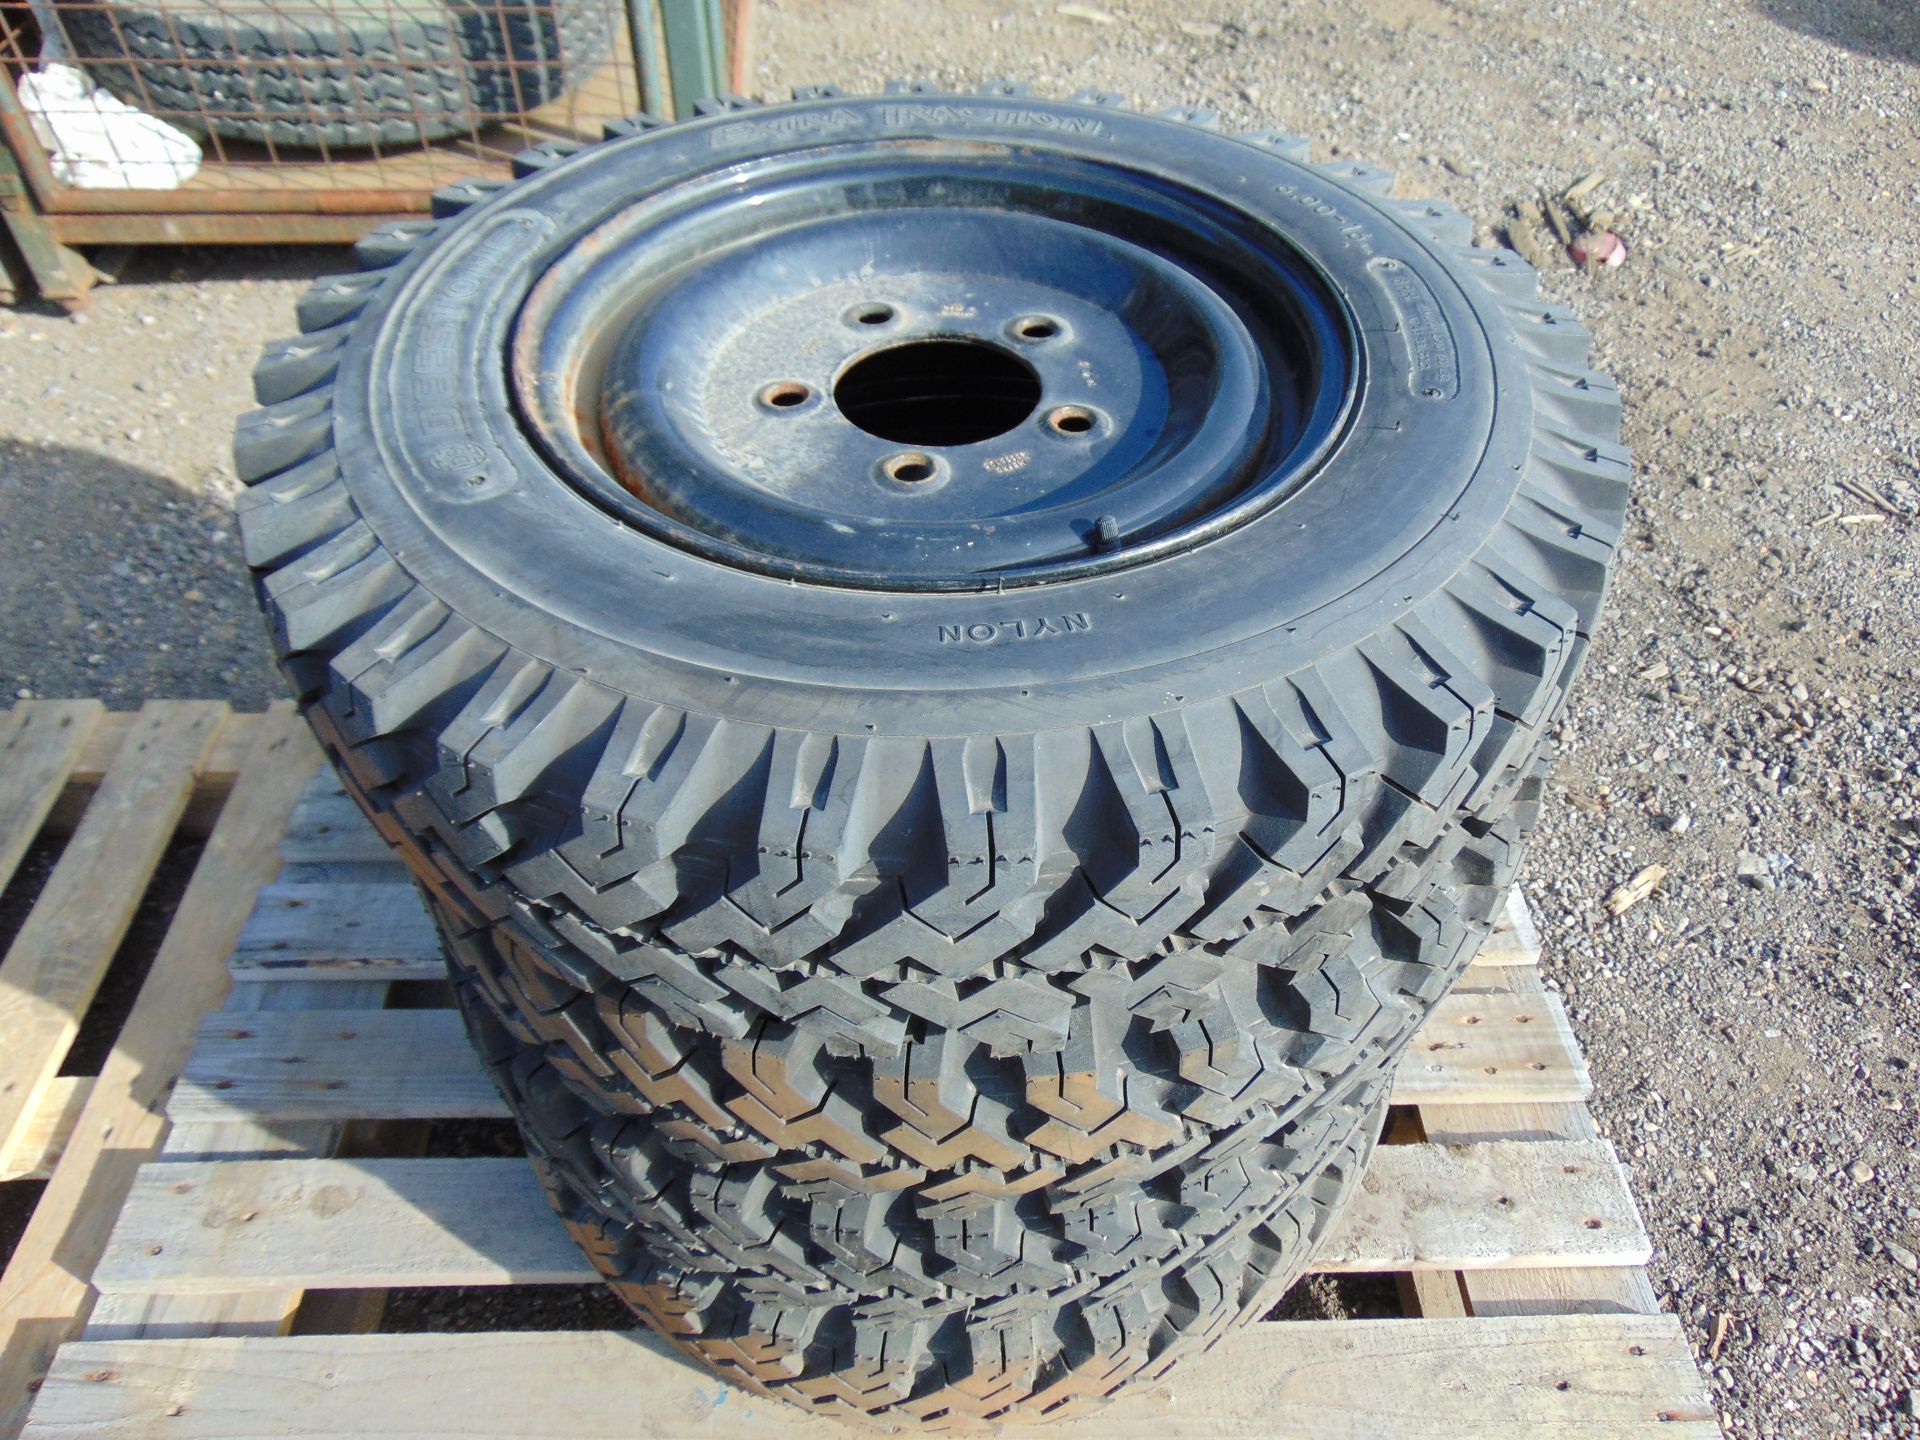 4 x Deestone Extra Traction 6.00-16 Tyres with 5 Stud Rims